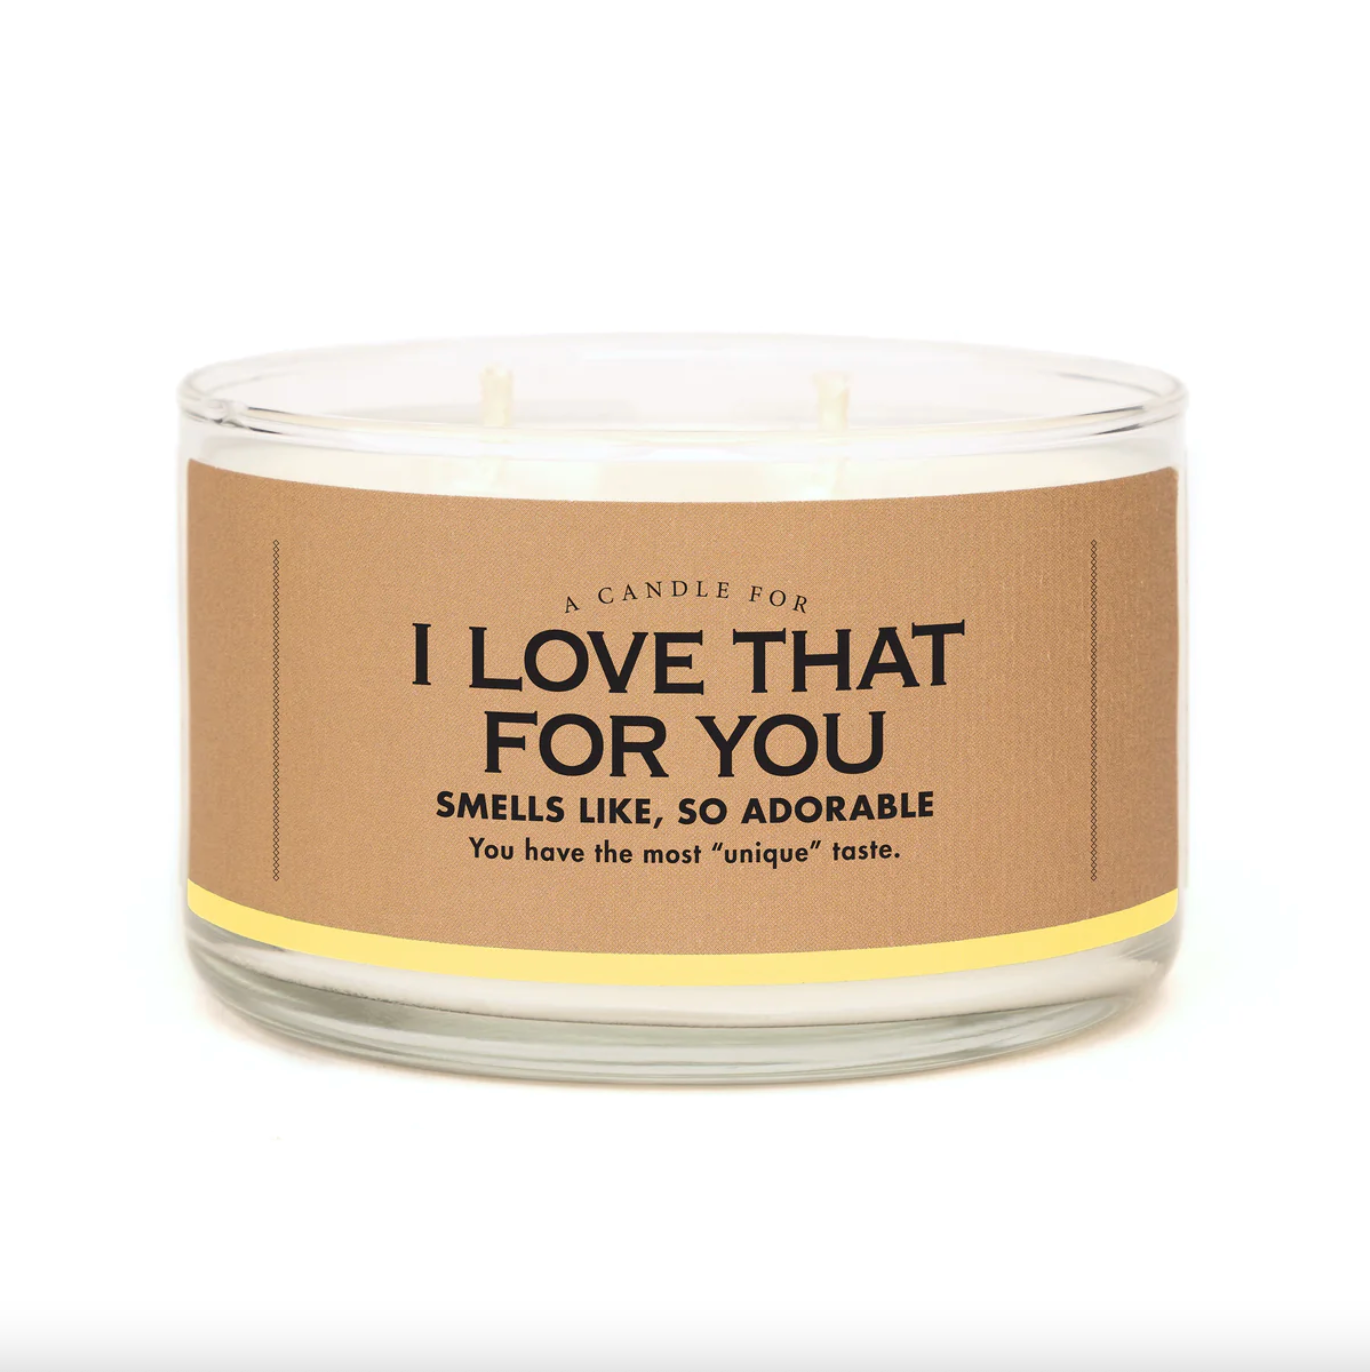 I Love That for You 10oz Candle - Heart of the Home LV